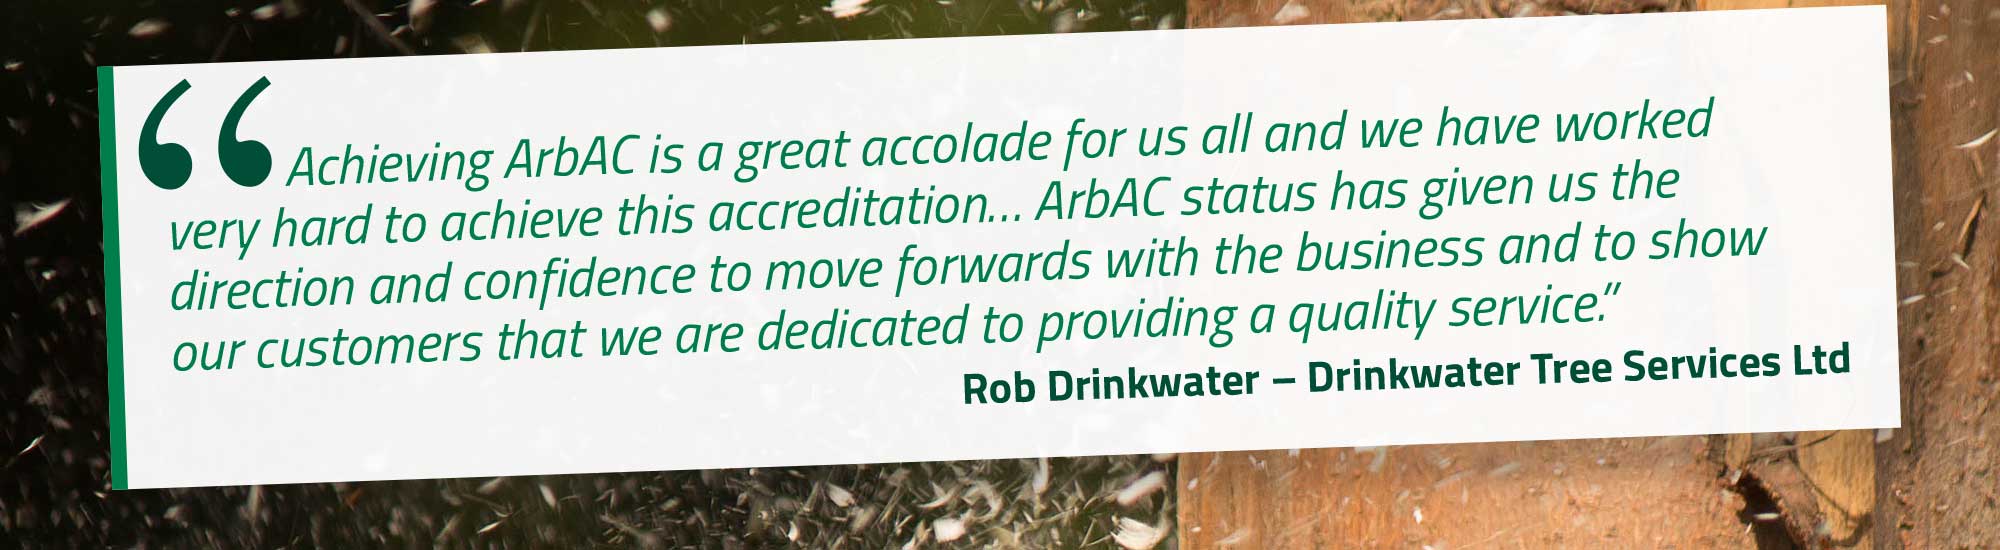 Achieving ArbAC is a great accolade for us all and we have worked very hard to achieve this accreditation… ArbAC status has given us the direction and confidence to move forwards with the business and to show our customers that we are dedicated to providing a quality service. Rob Drinkwater – Drinkwater Tree Services Ltd